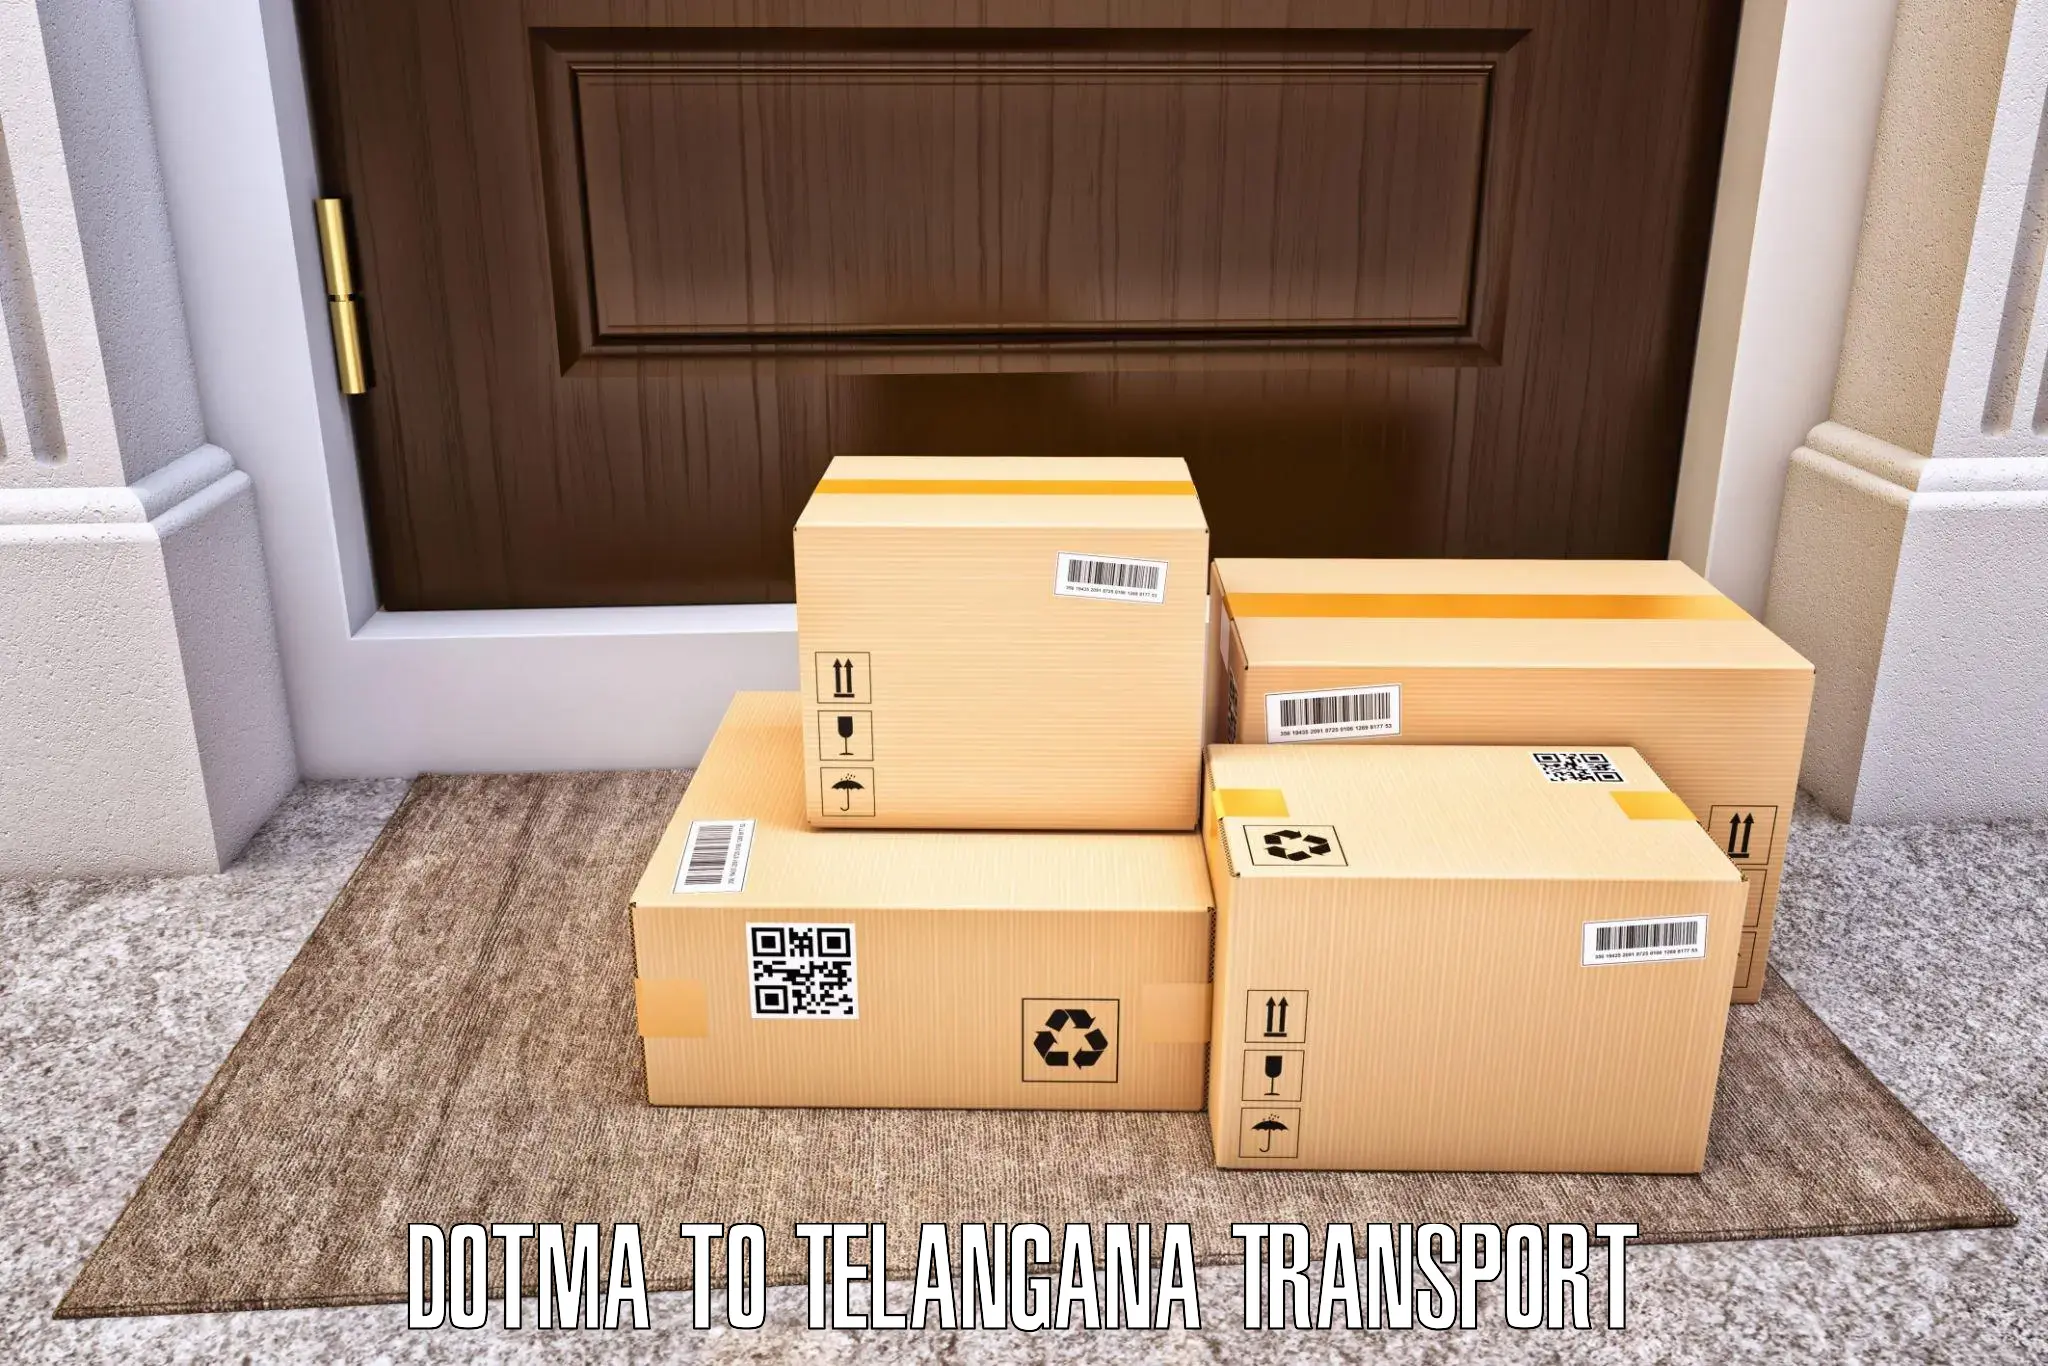 Container transport service Dotma to Telangana